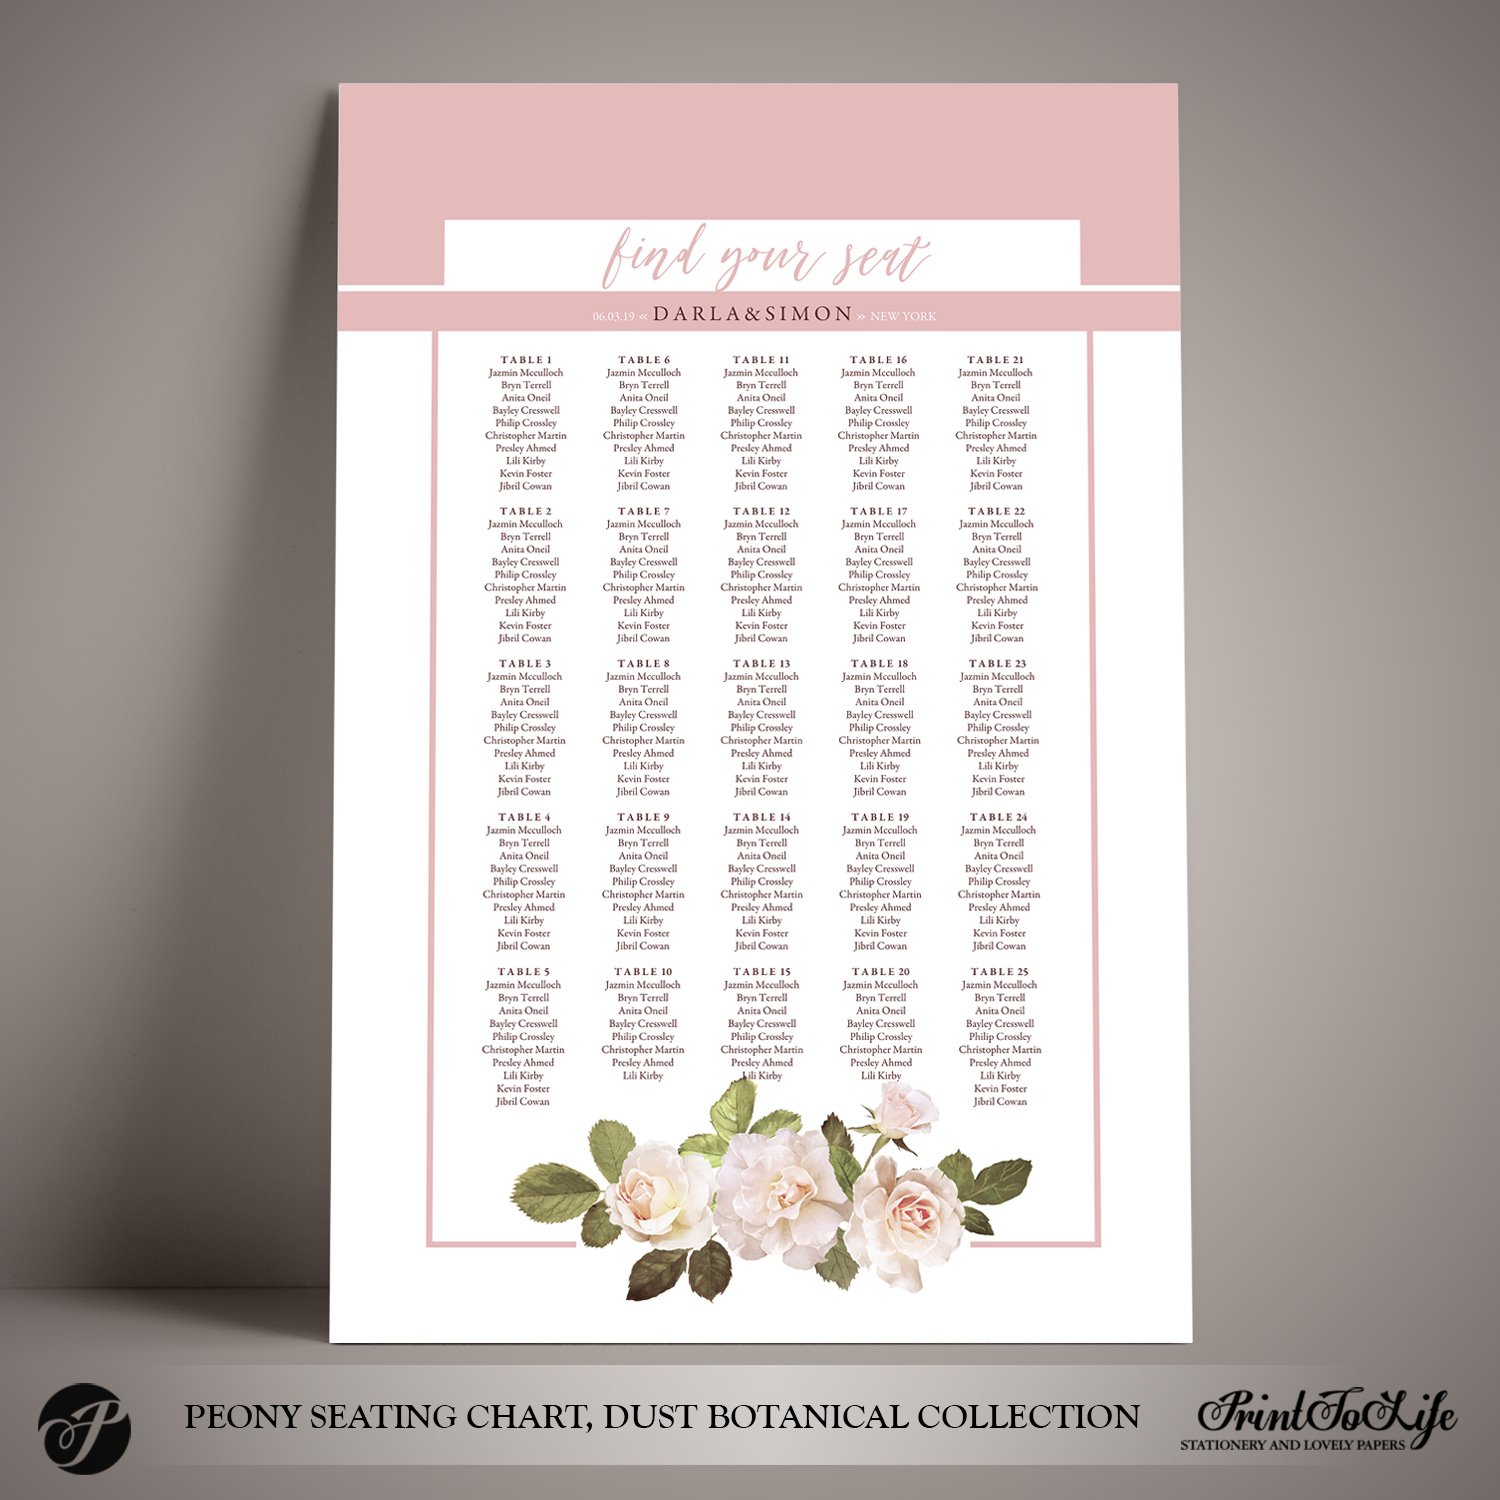 Peony Seating Chart by Printolife